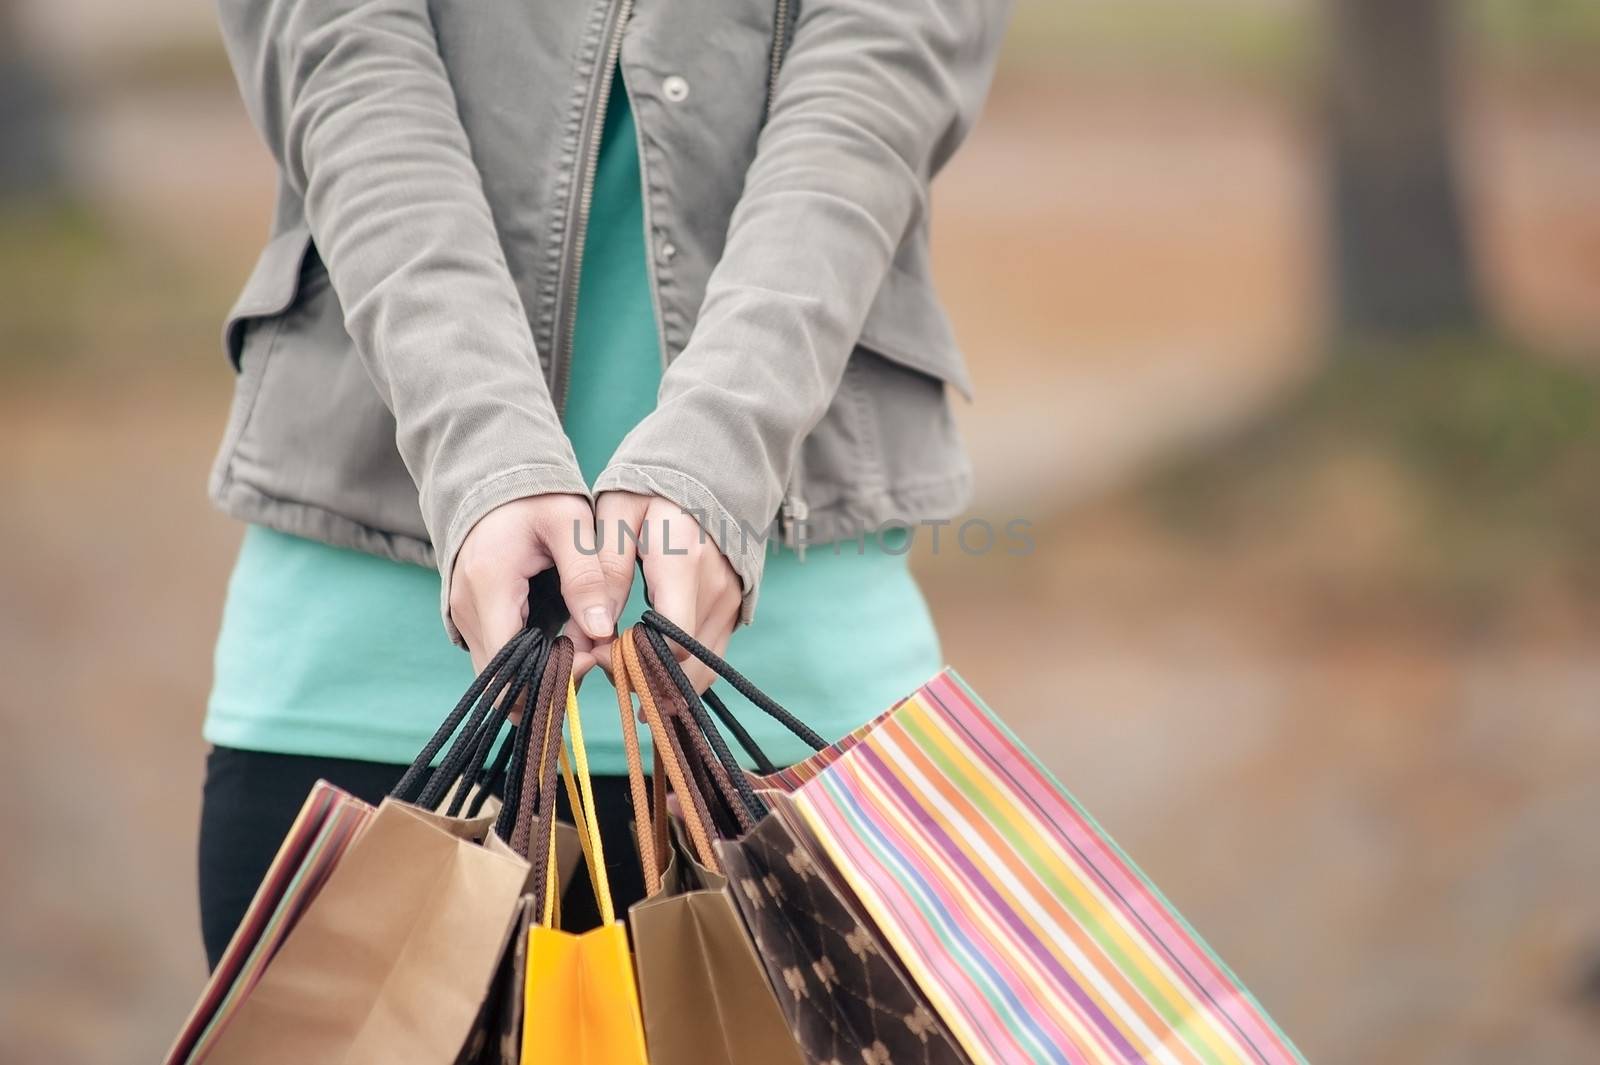 Concept of woman shopping and holding bags, closeup images.